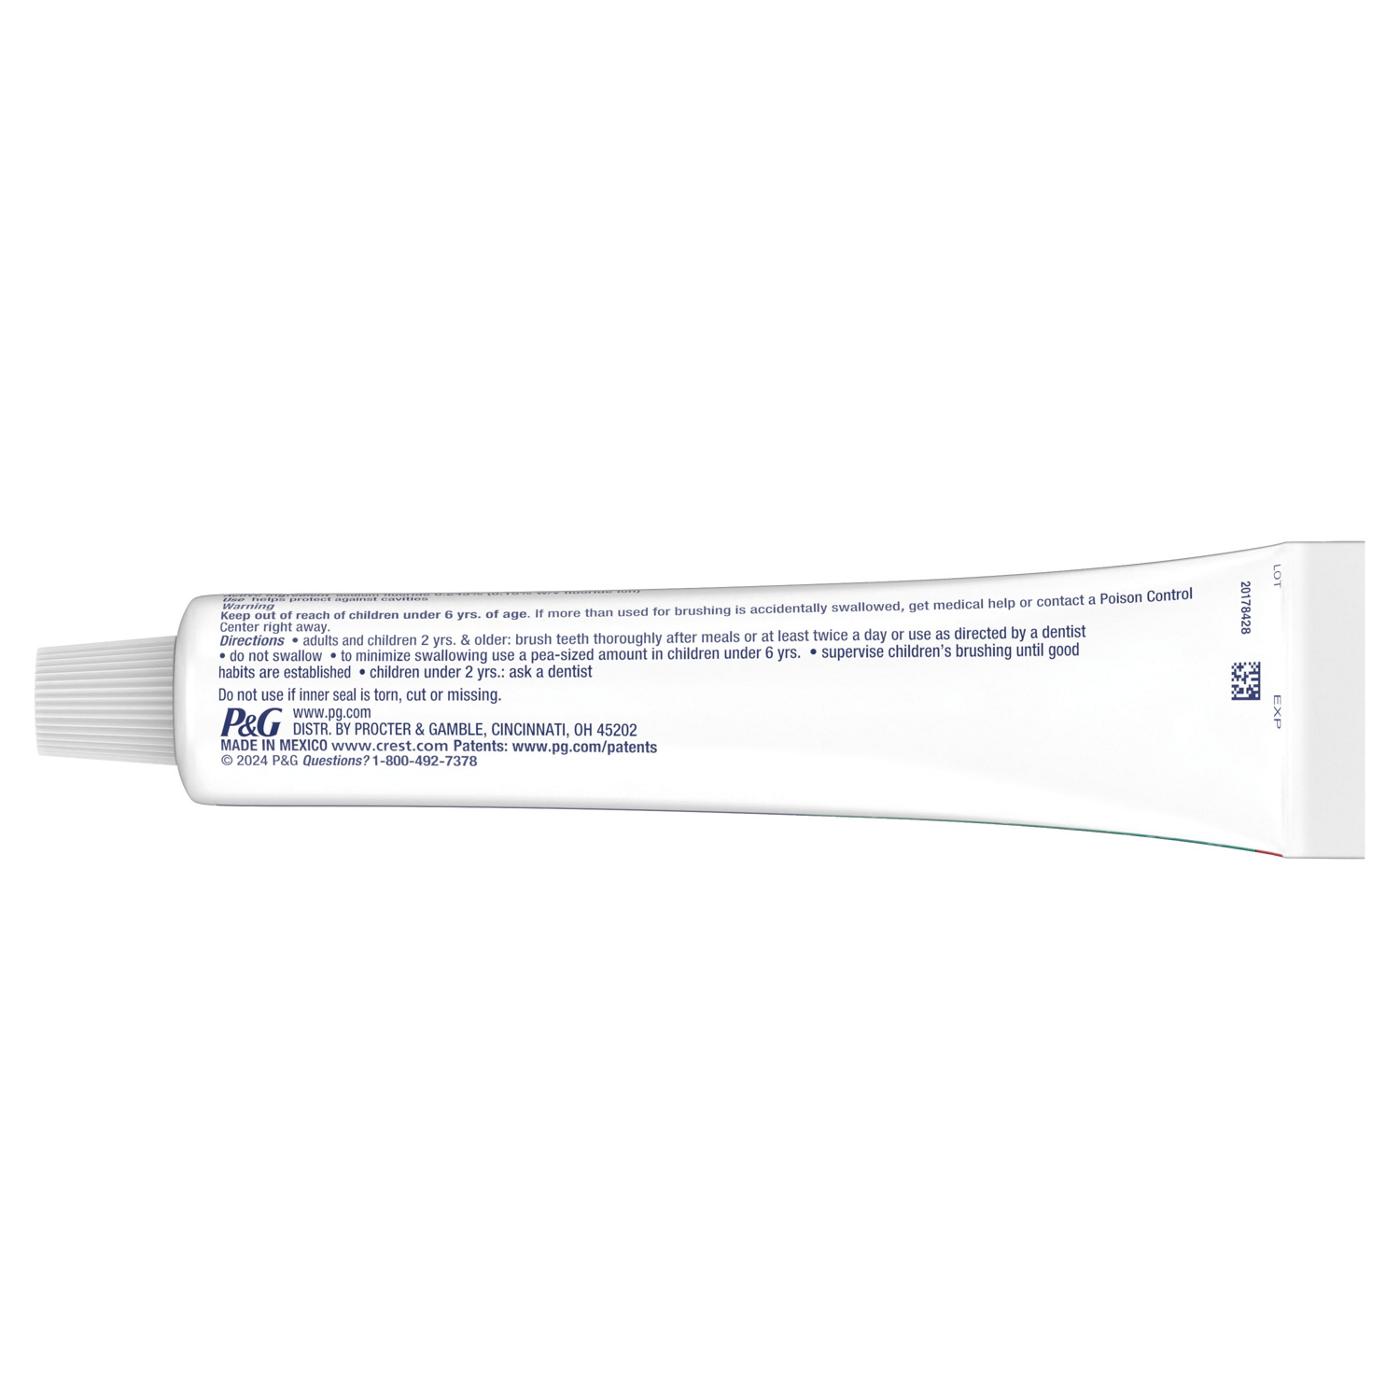 Crest Complete + Scope Whitening Toothpaste - Minty Fresh Striped; image 10 of 10